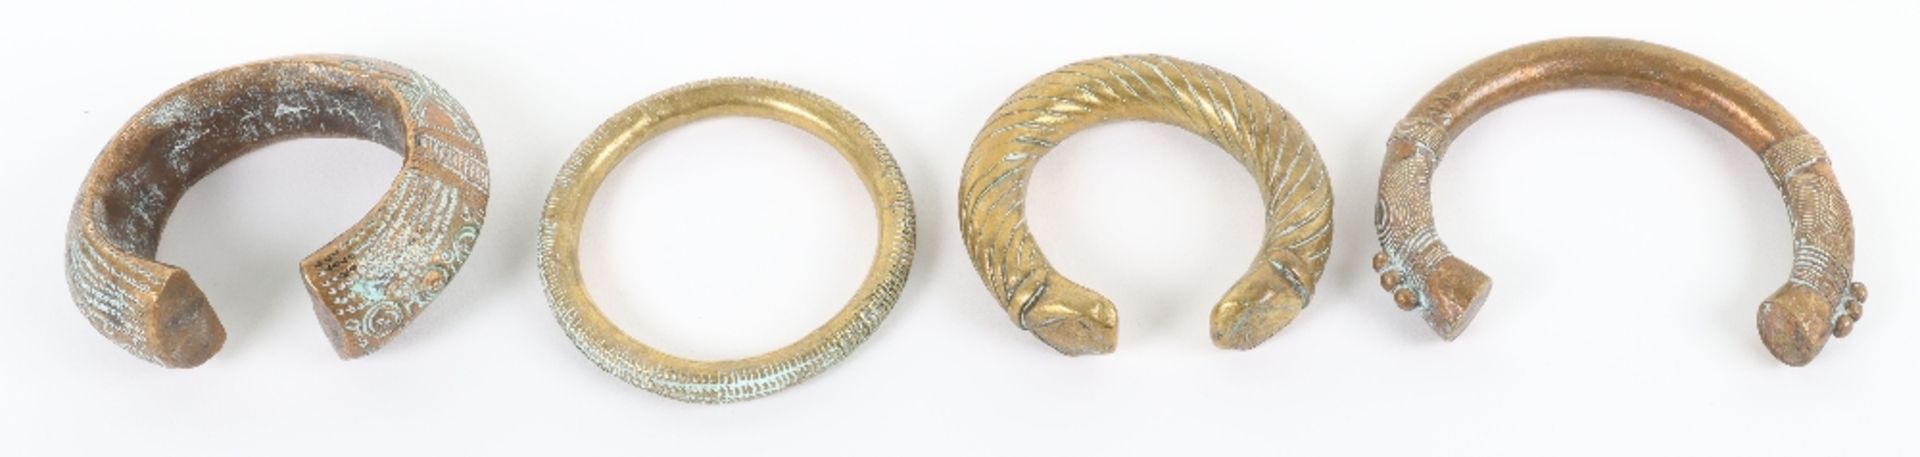 Four 18th century brass and bronze African bangles